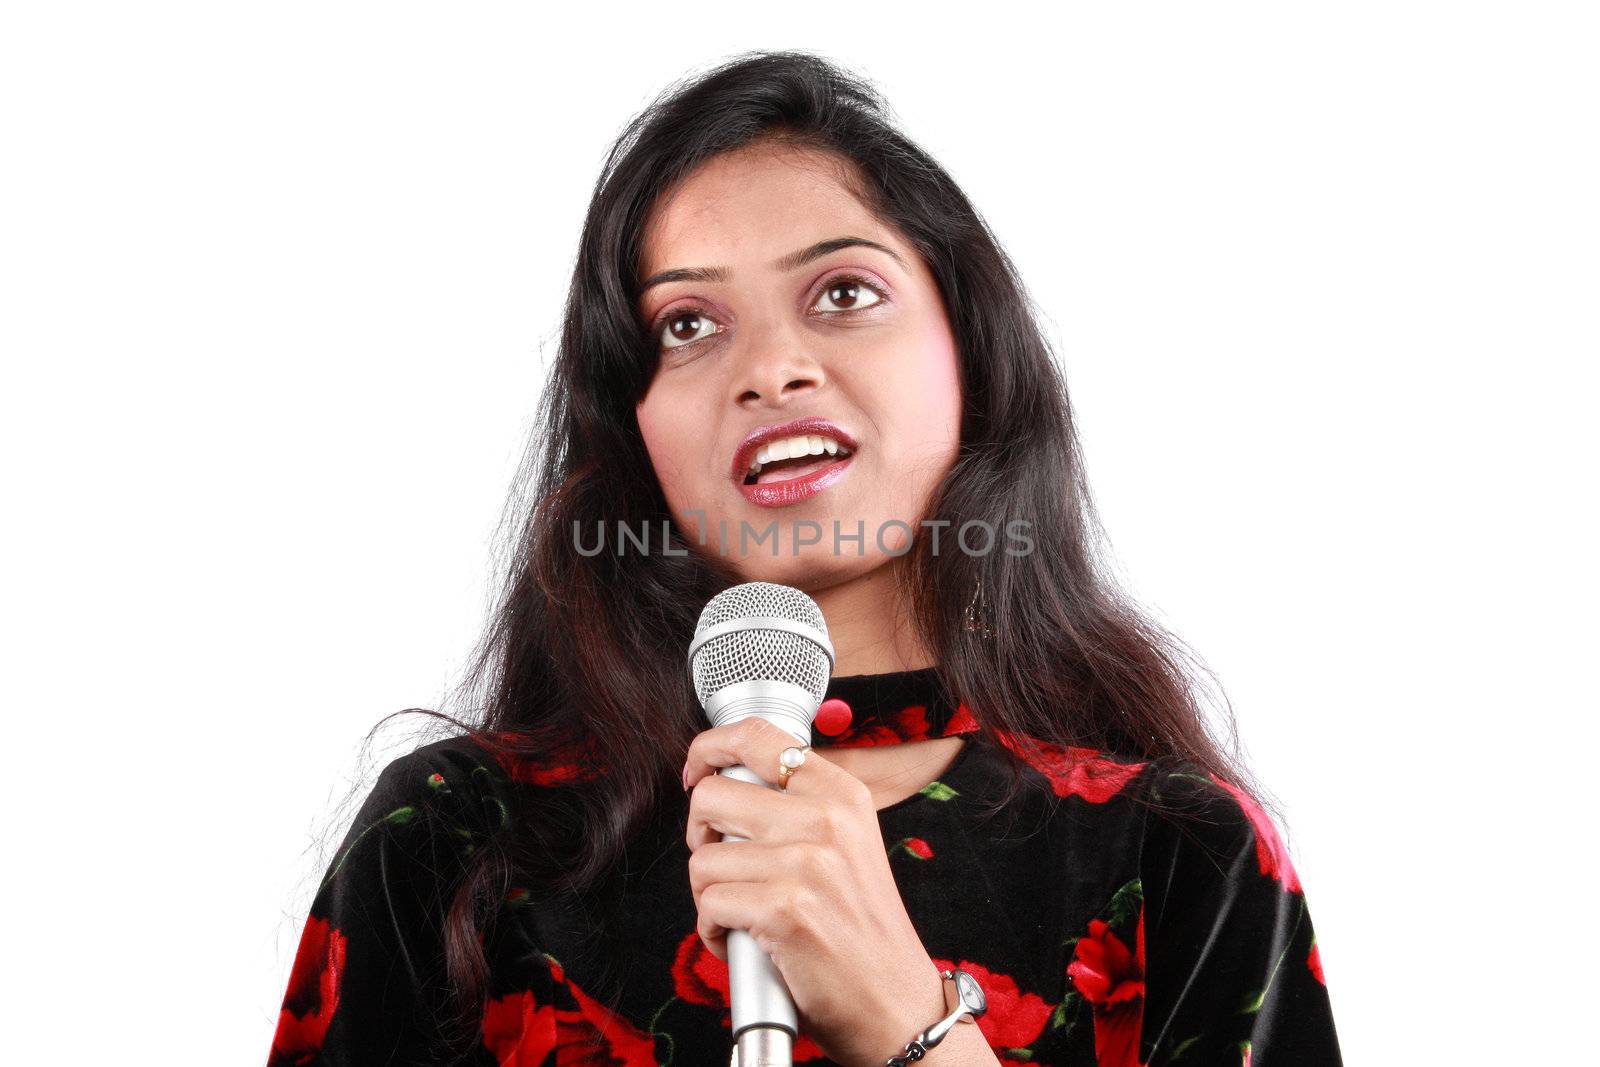 A portrait of a show host with a mic talking to the audience, on white studio background.